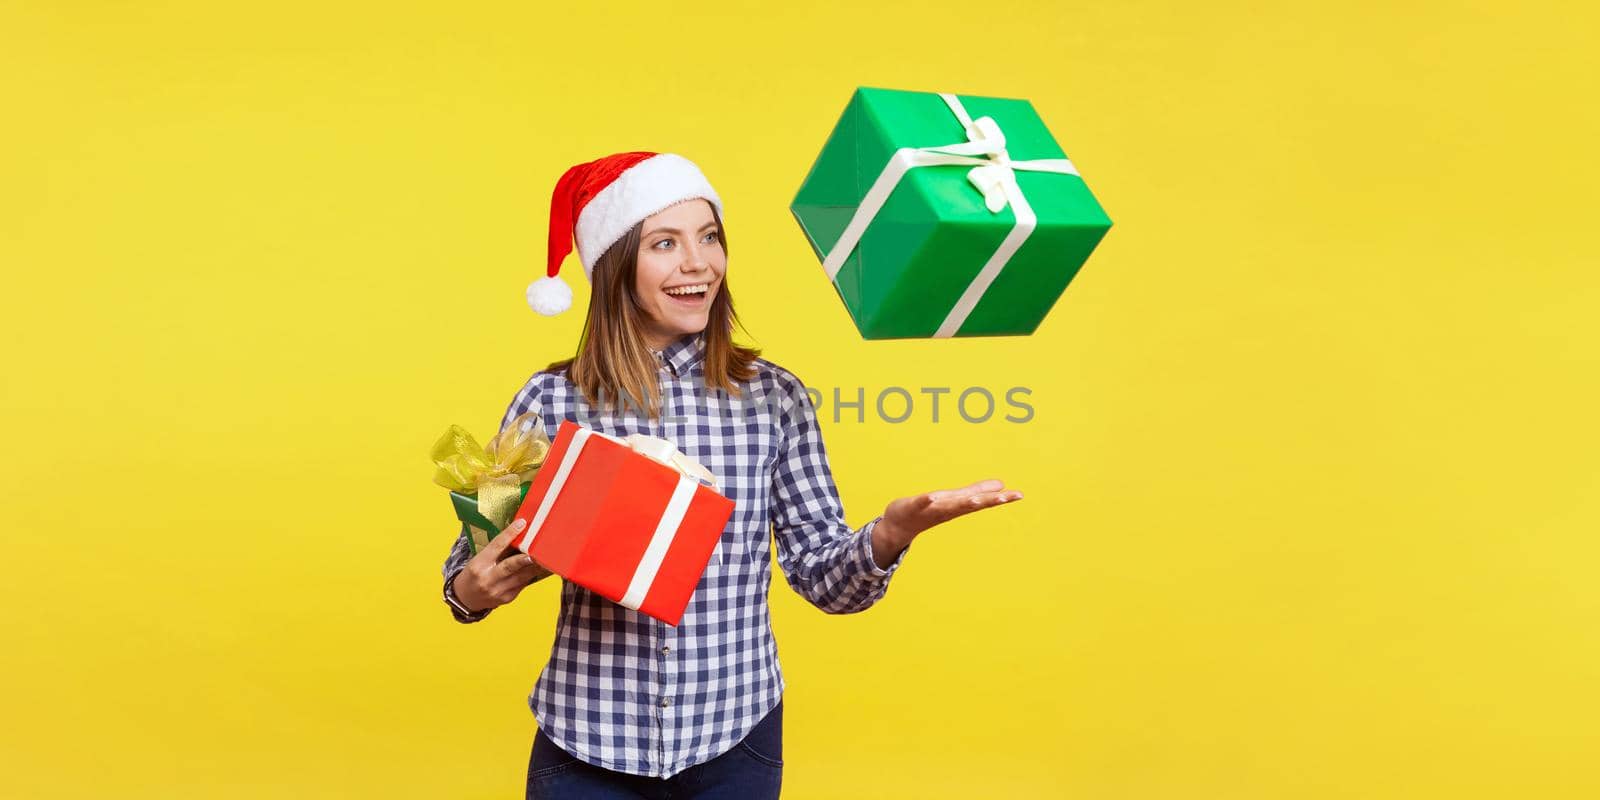 Portrait of happy brunette young woman in santa hat and checkered shirt standing throwing gift boxes in air or catching presents, christmas shopping. indoor studio shot isolated on yellow background